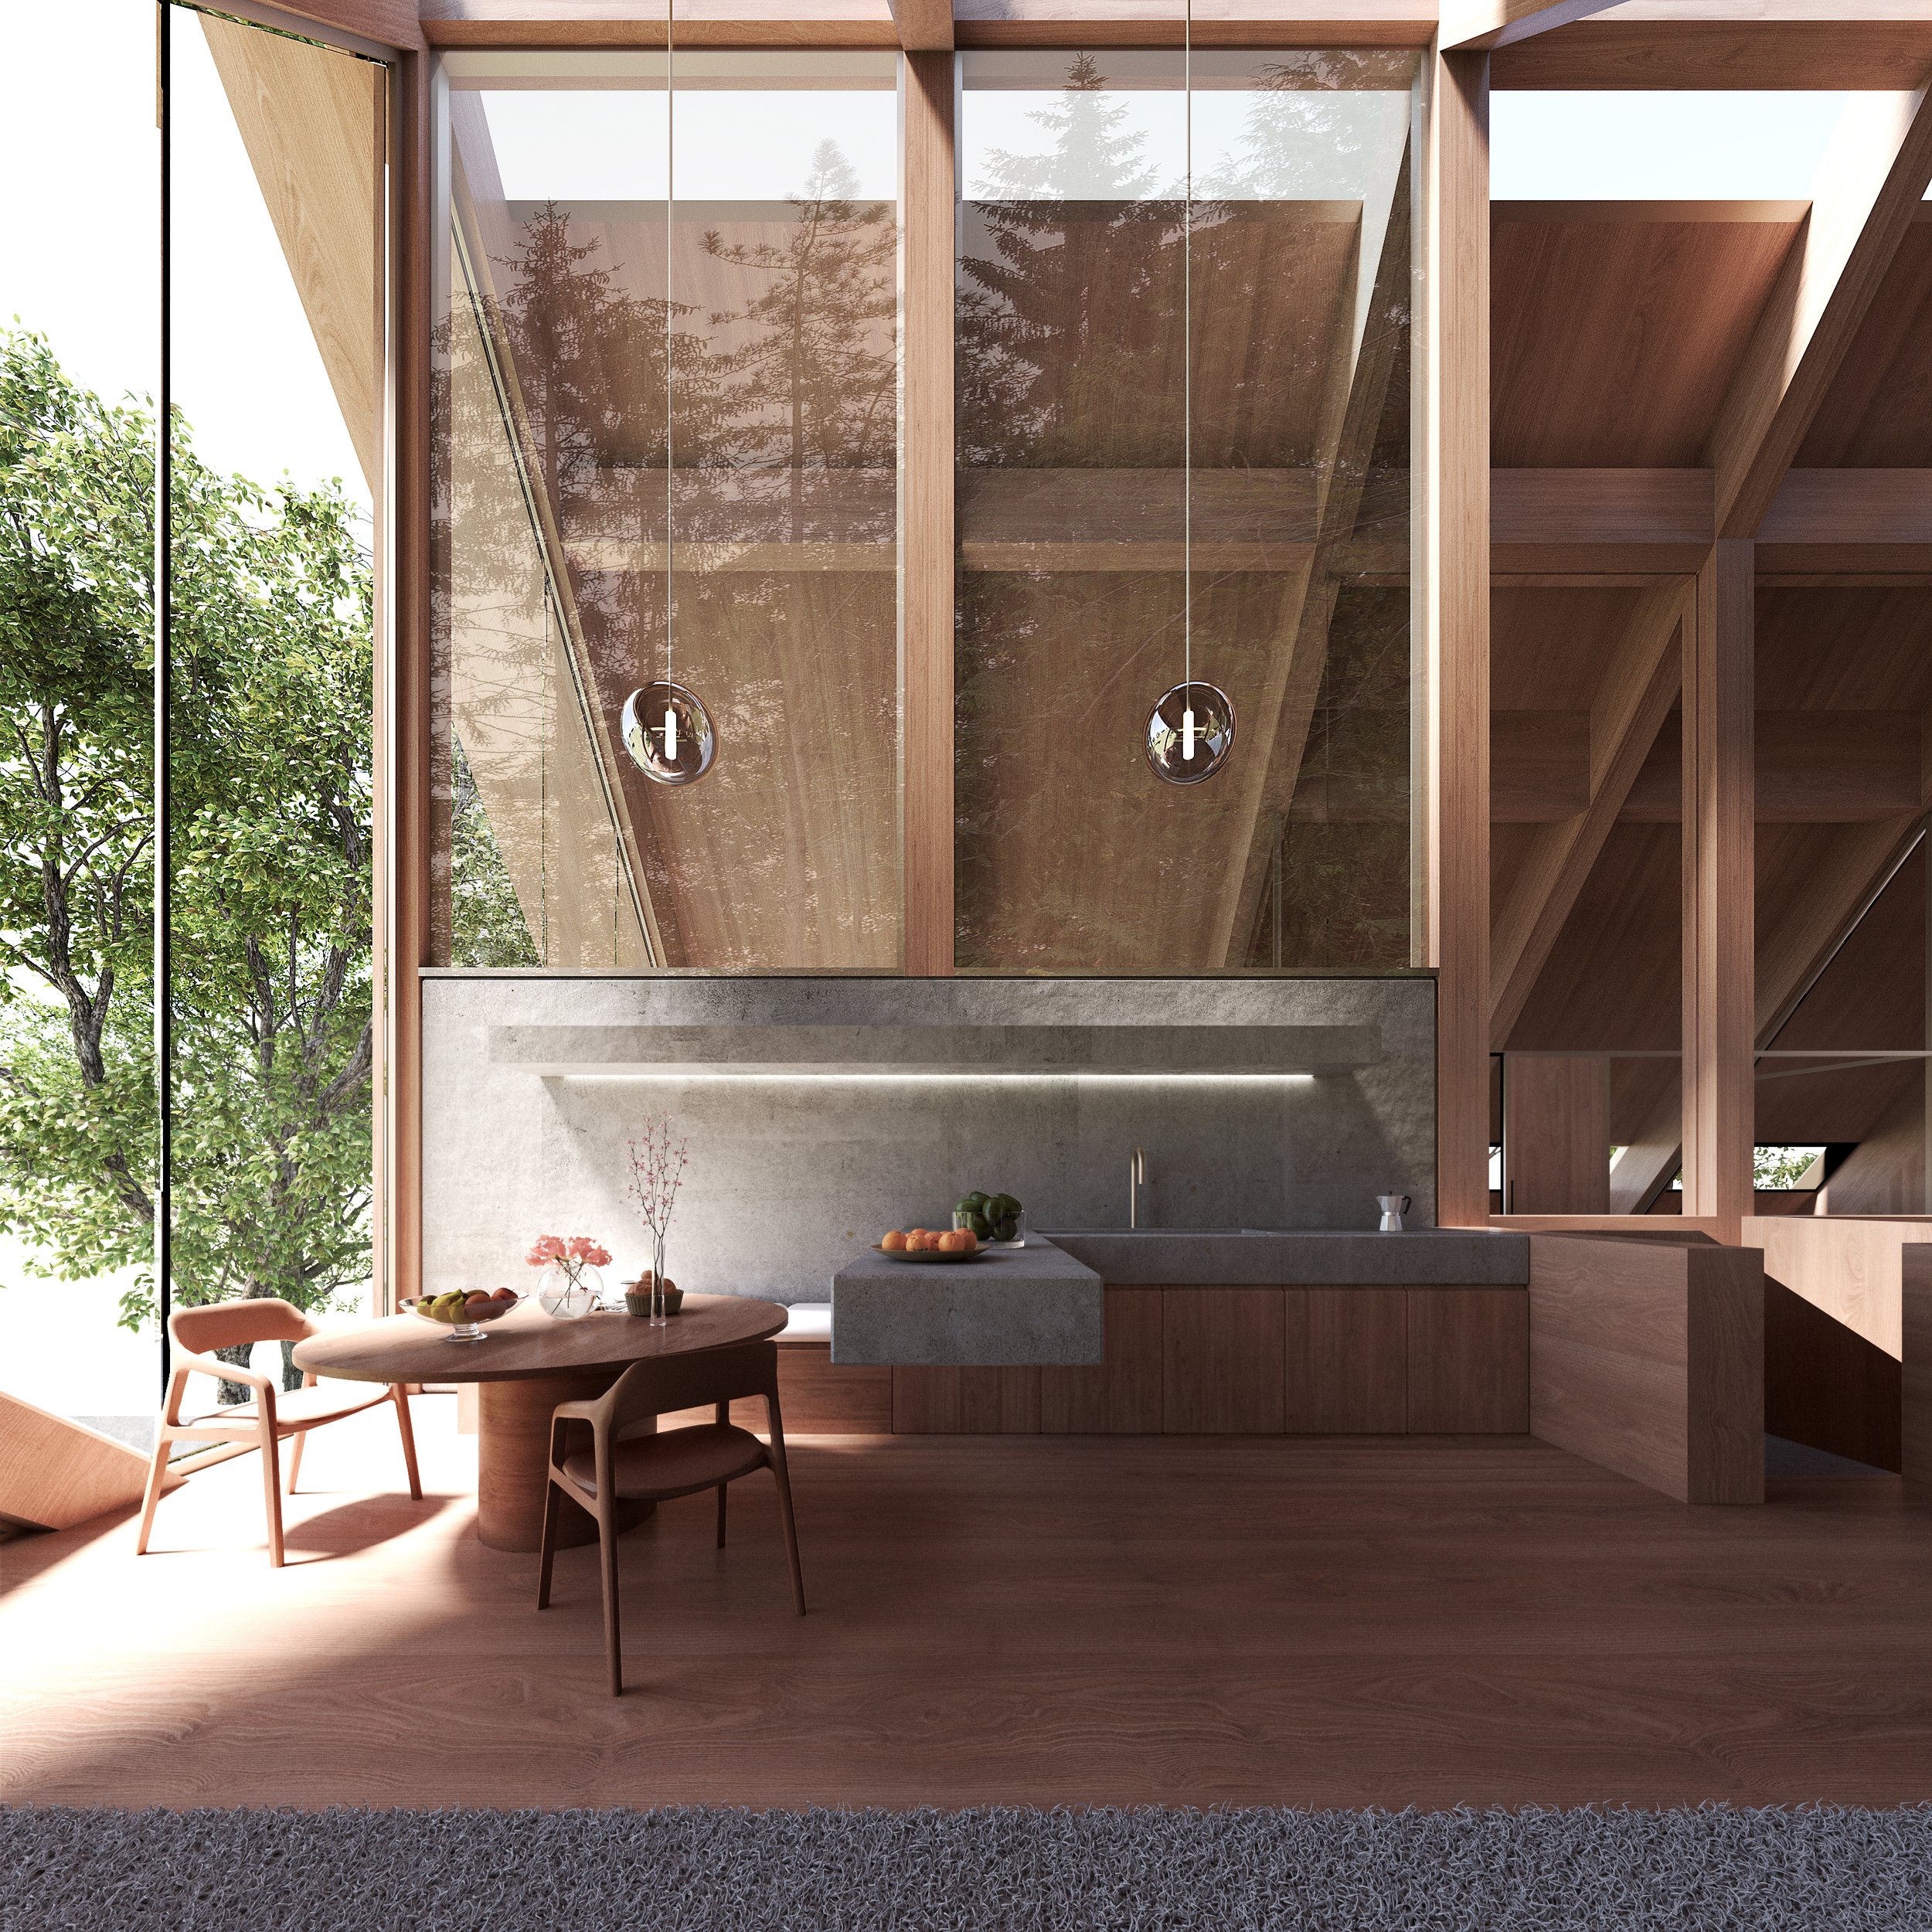 LEVITATED HOUSE - INTERIOR PERSPECTIVE 02.jpg